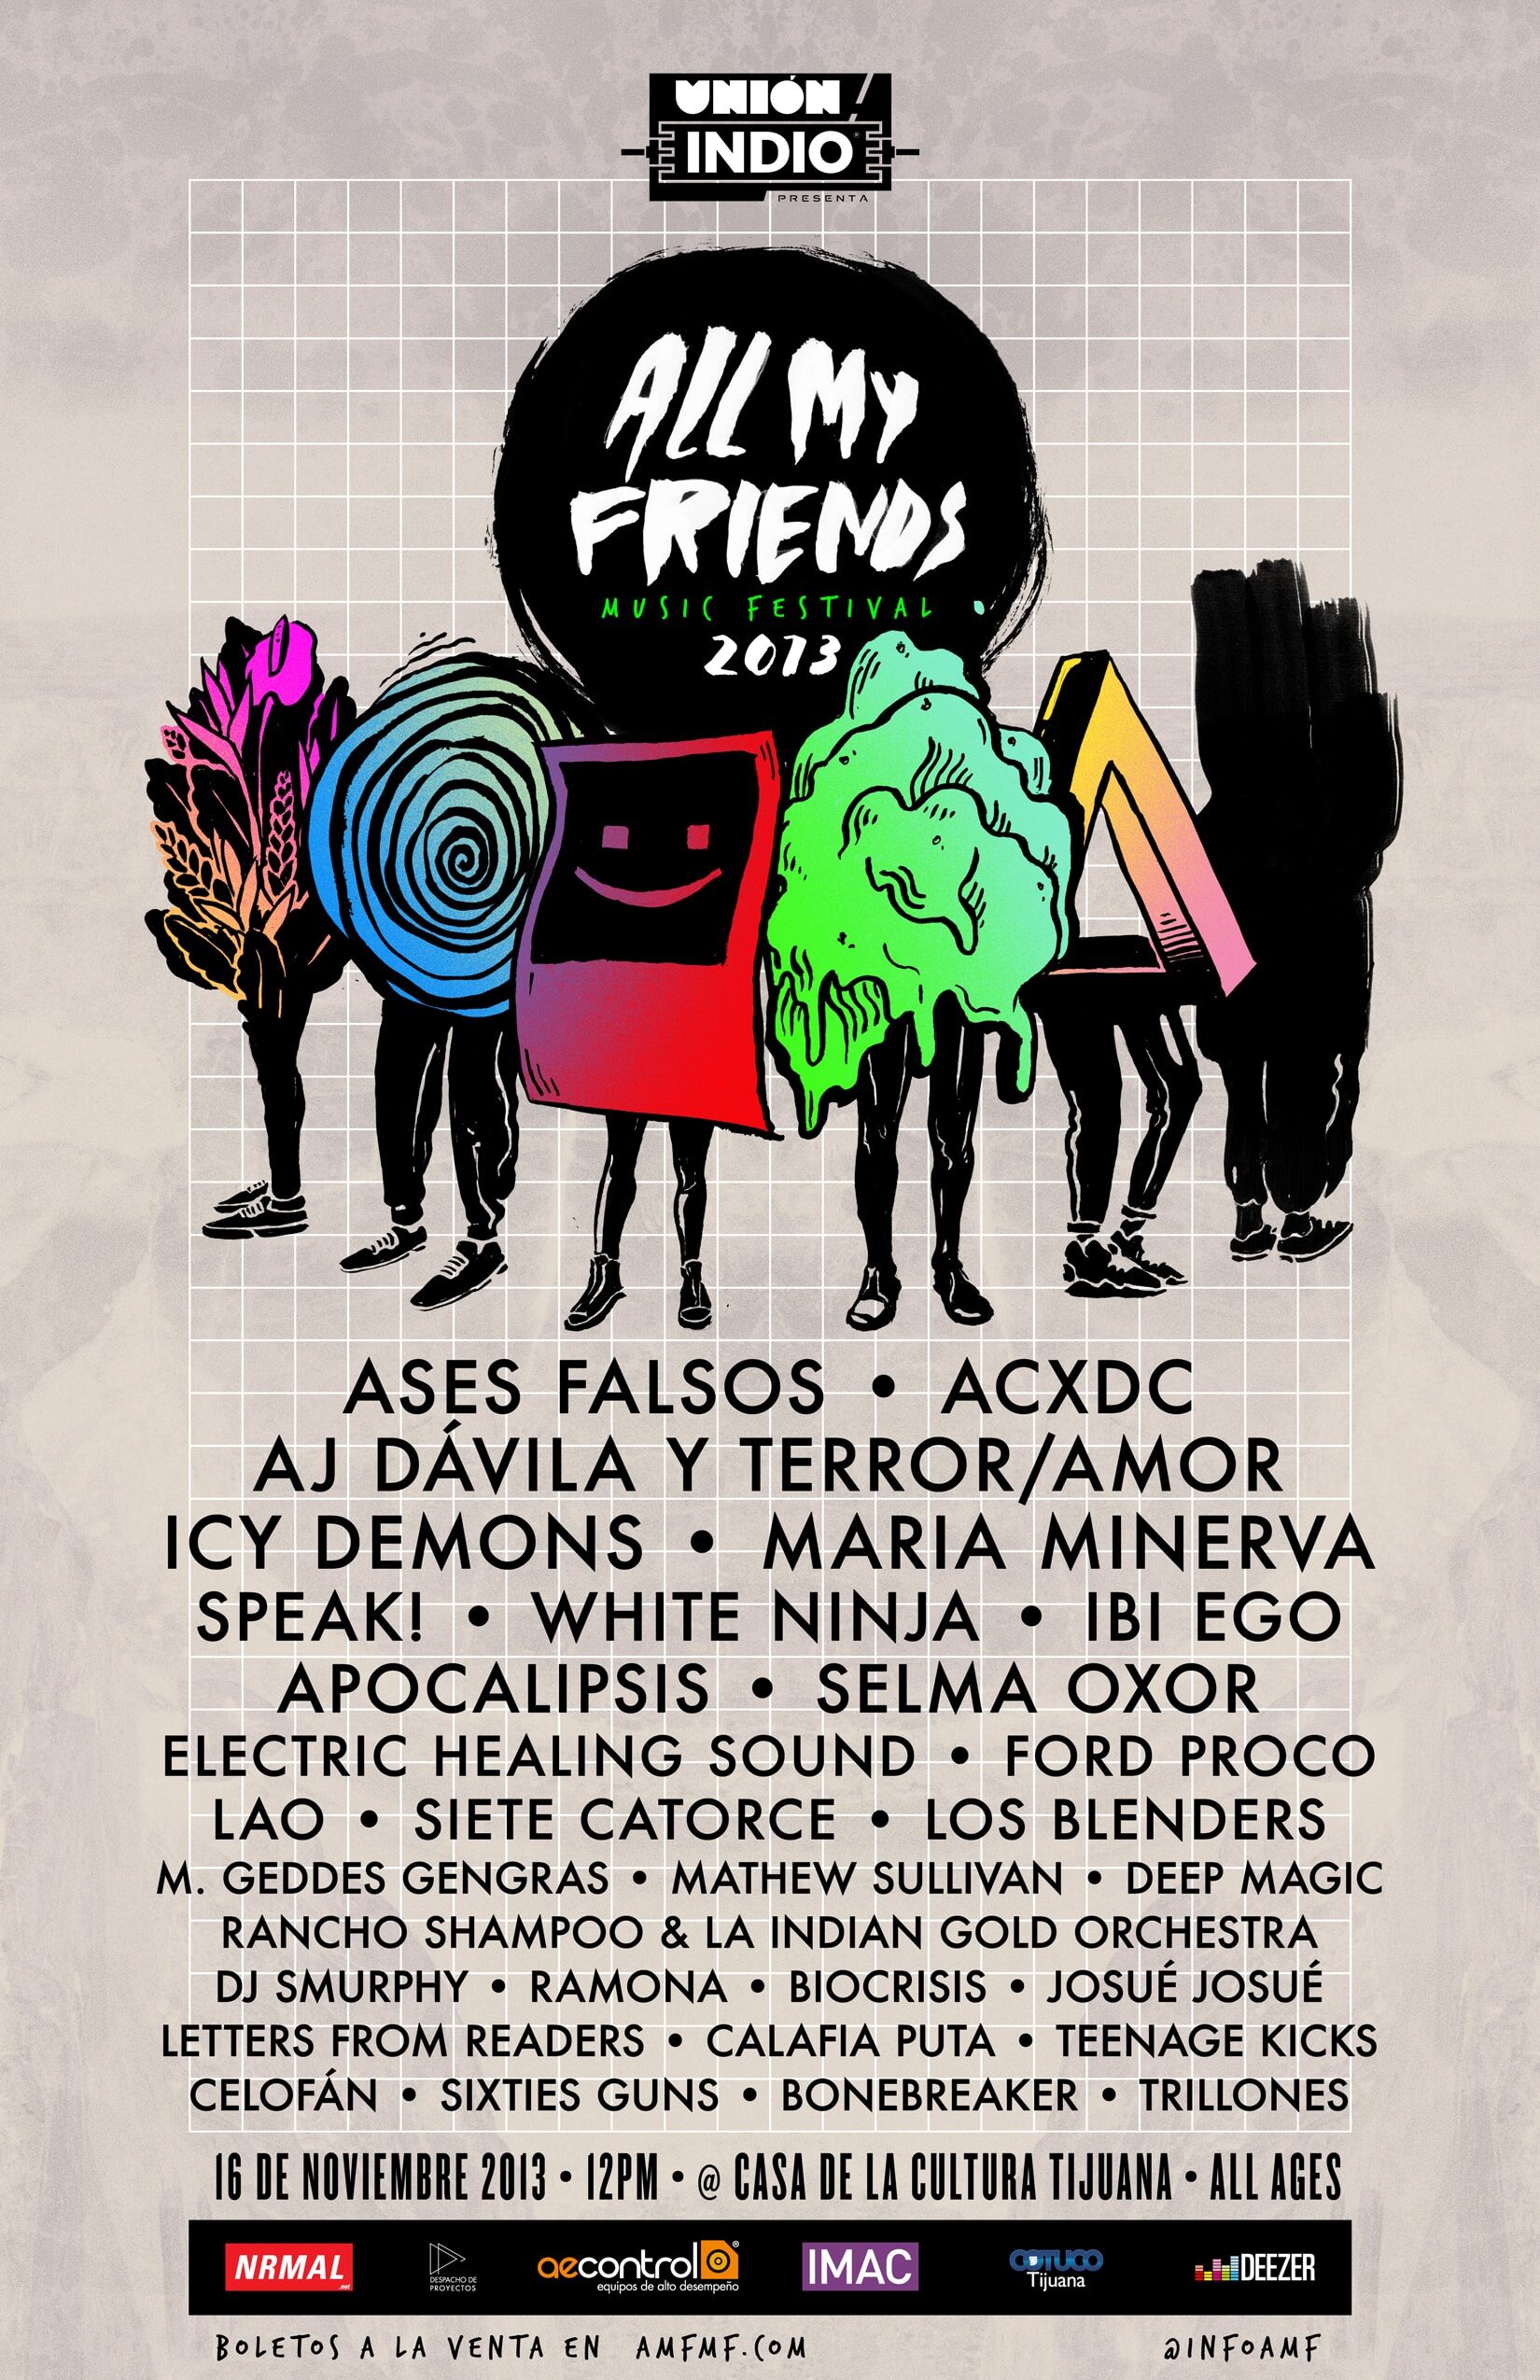 All My Friends Music Festival 2013